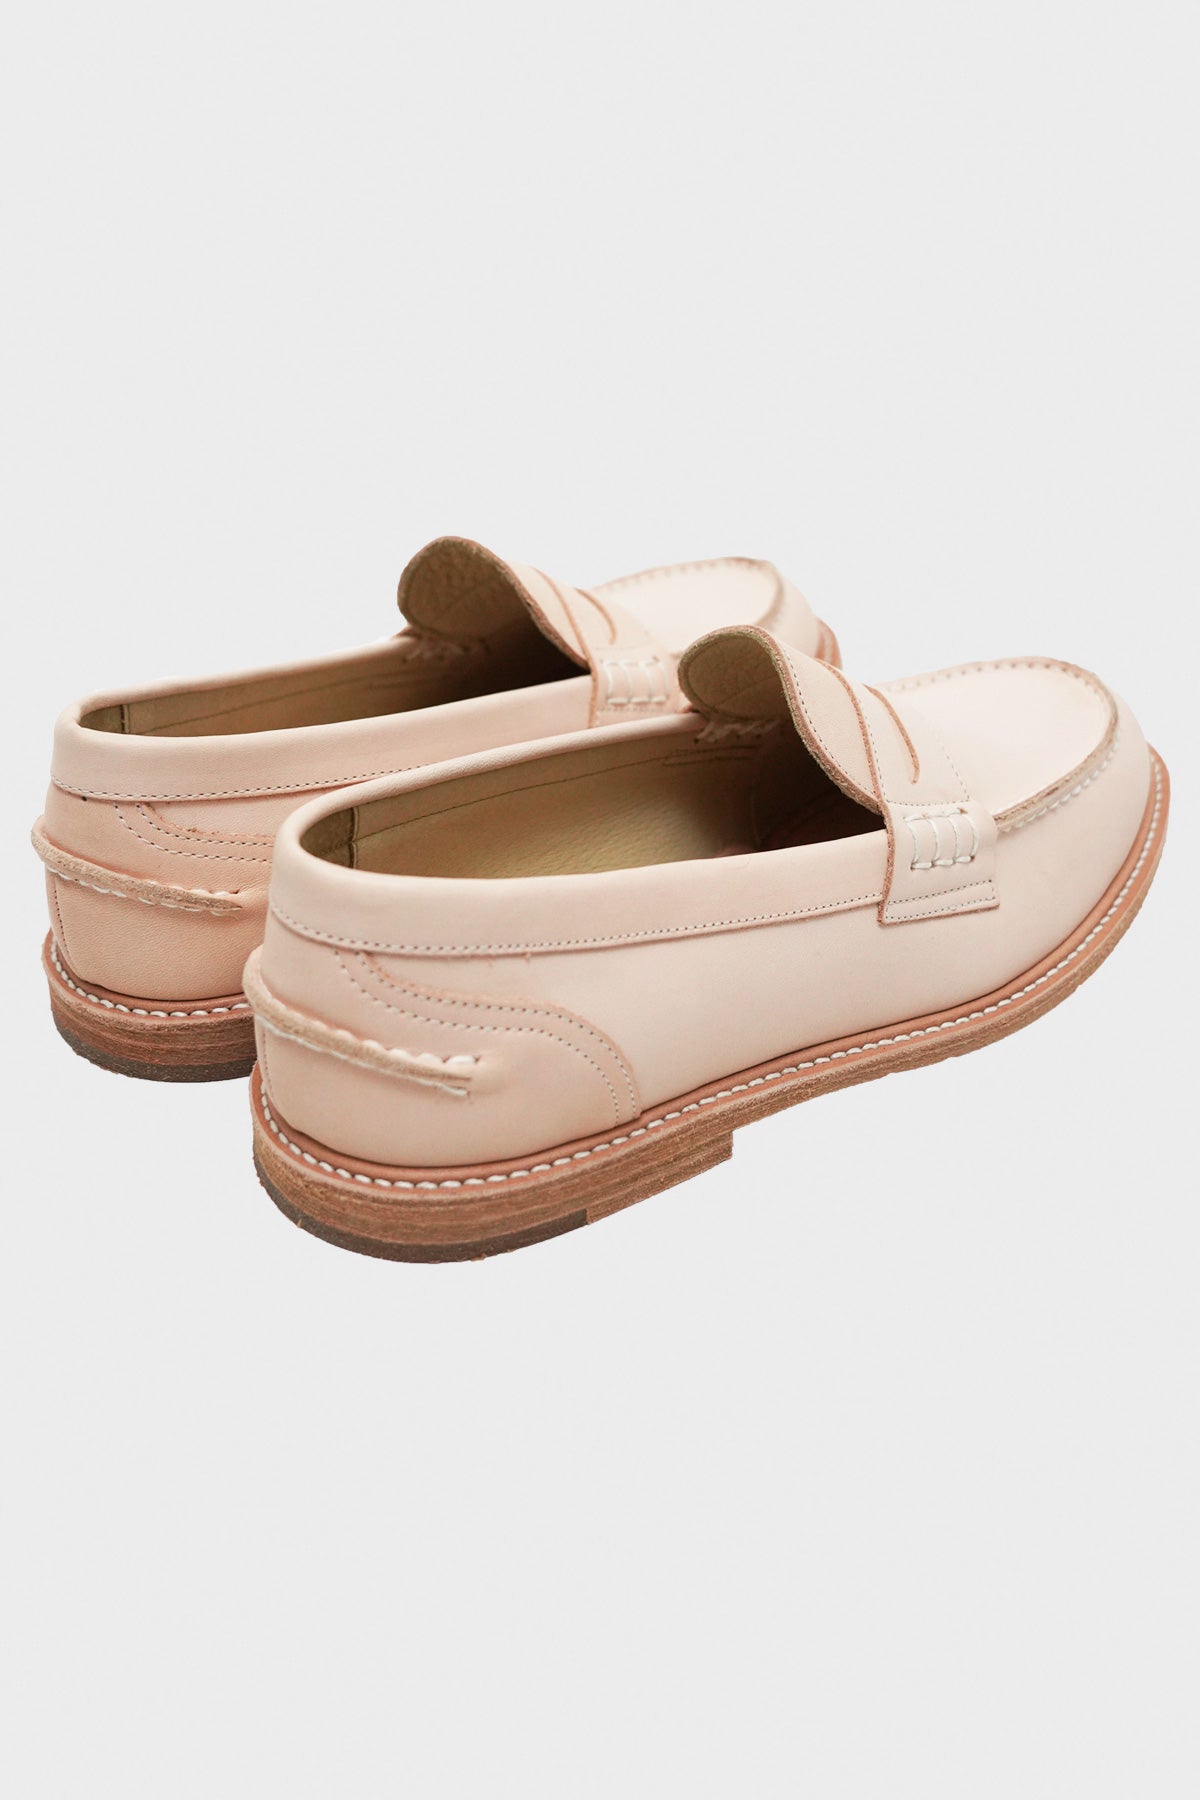 Hender Scheme Slouchy Loafer | Natural | Canoe Club